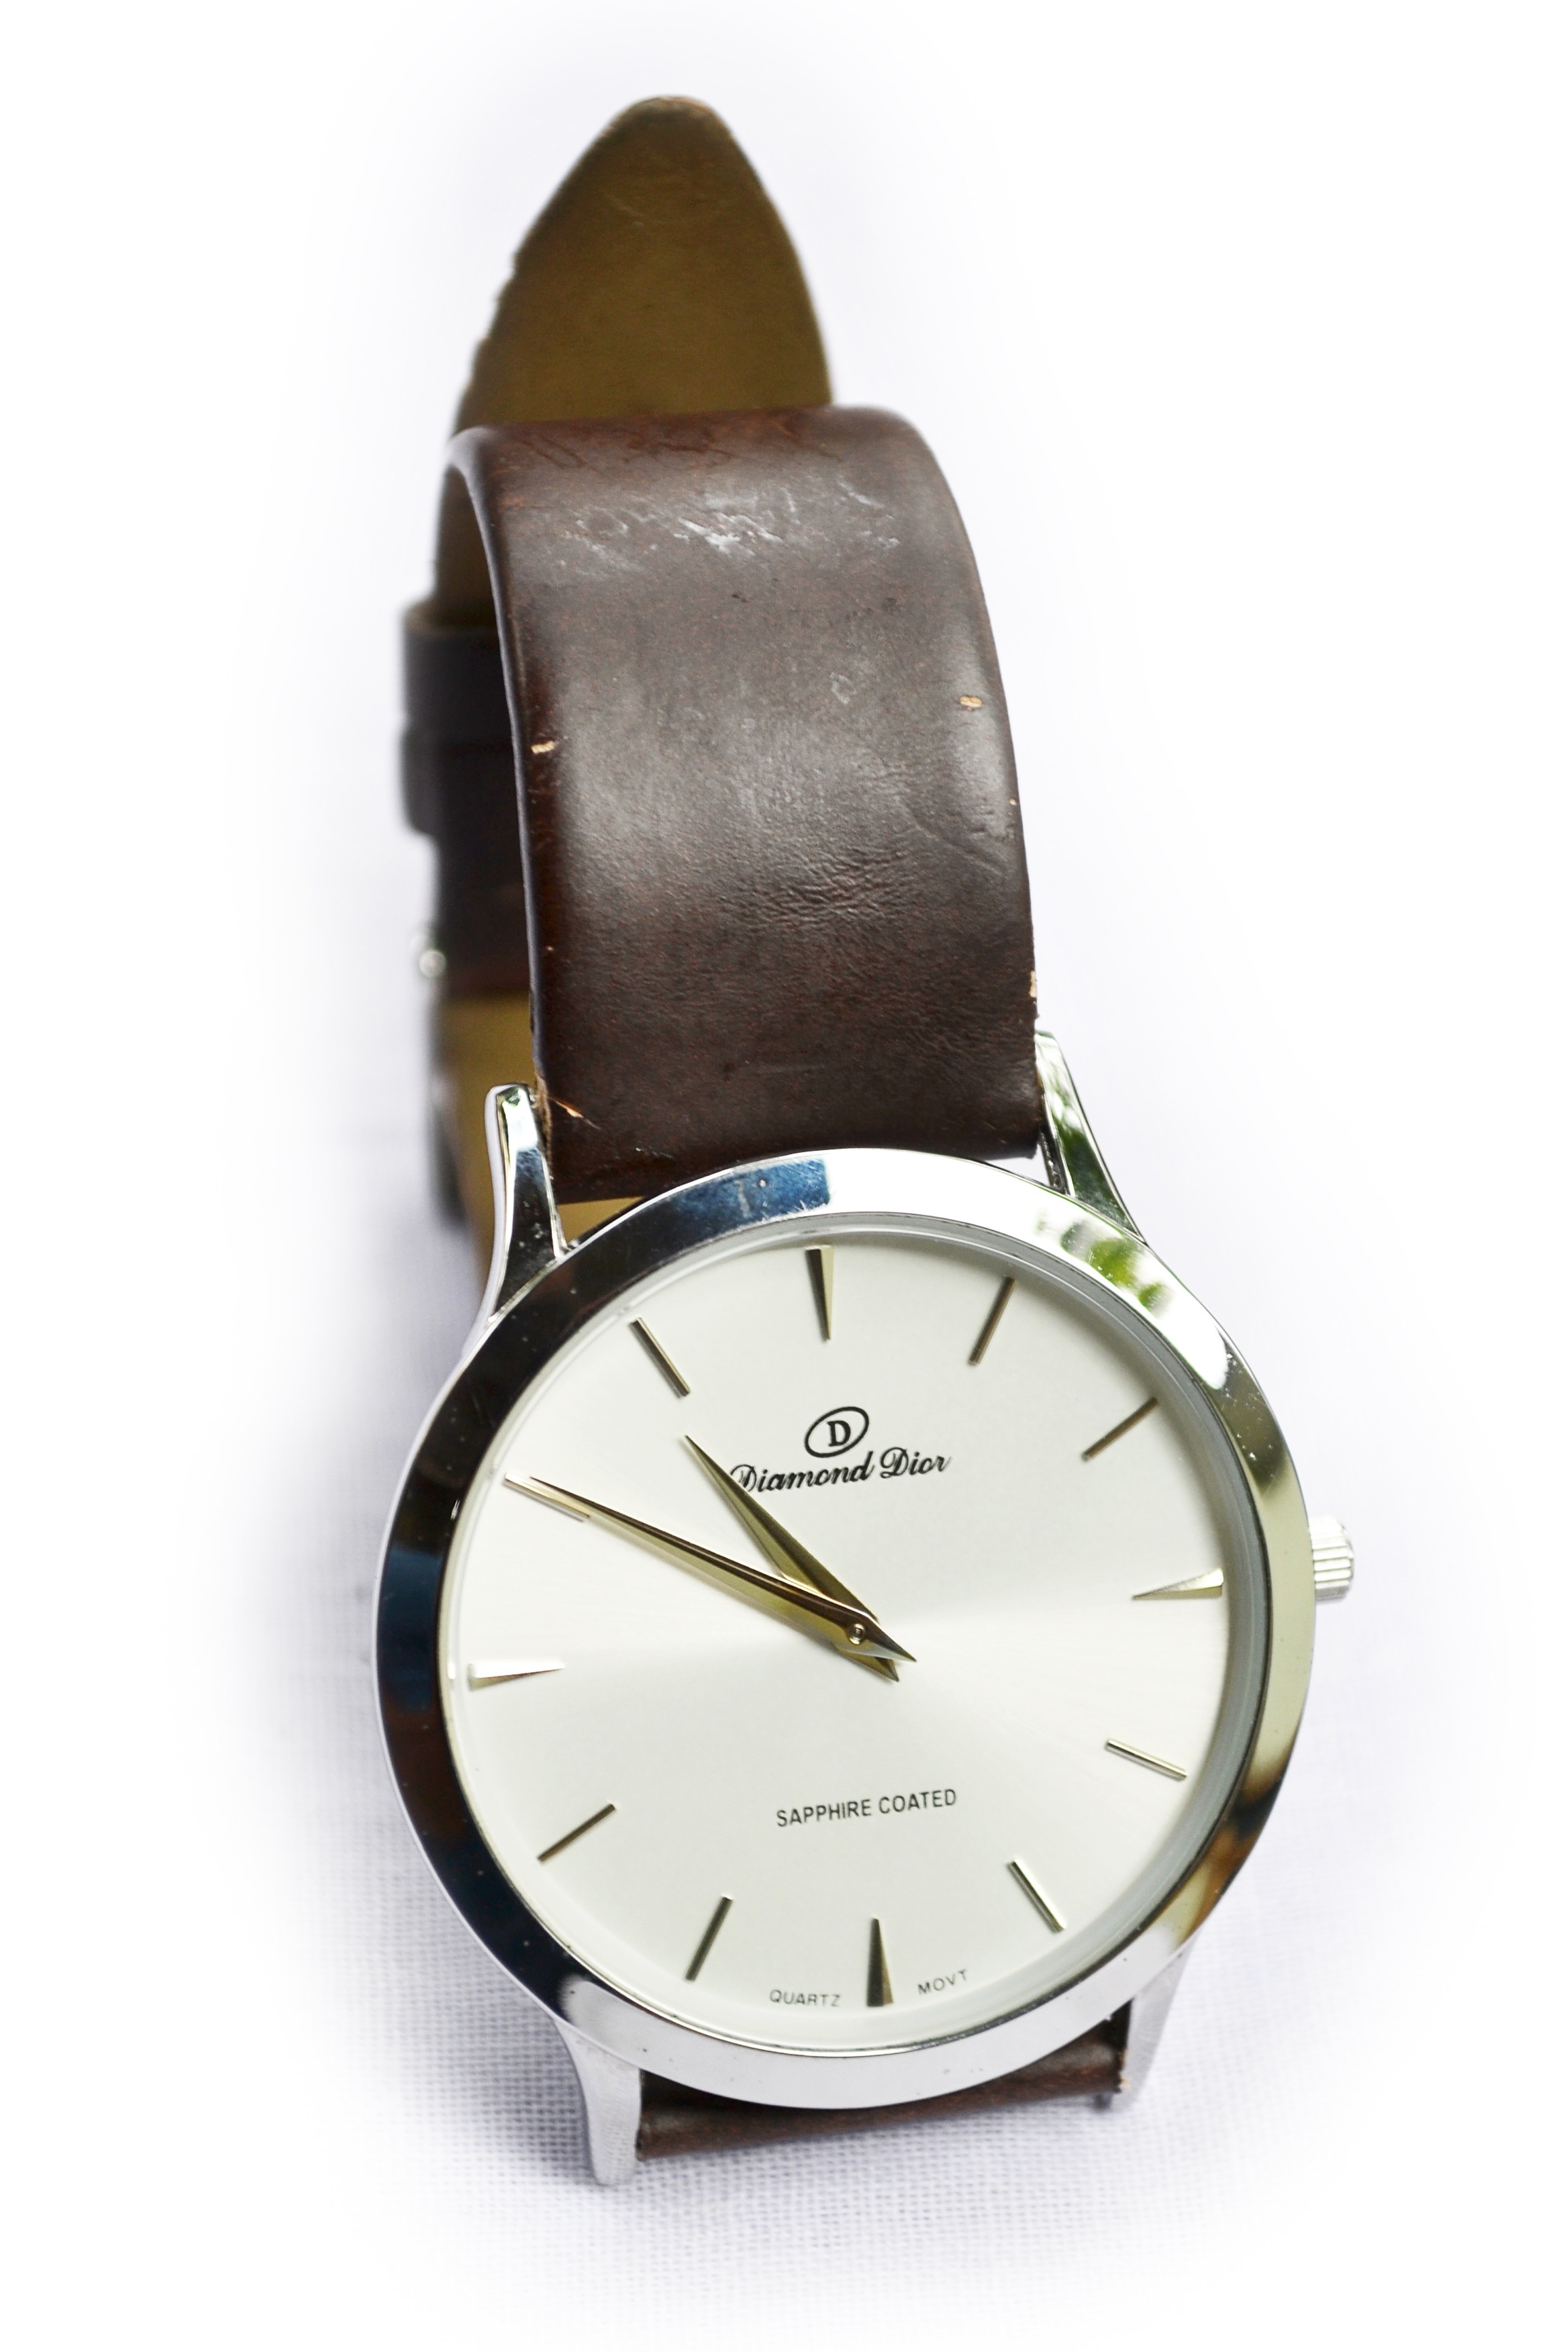 silver round analog watch with black leather strap